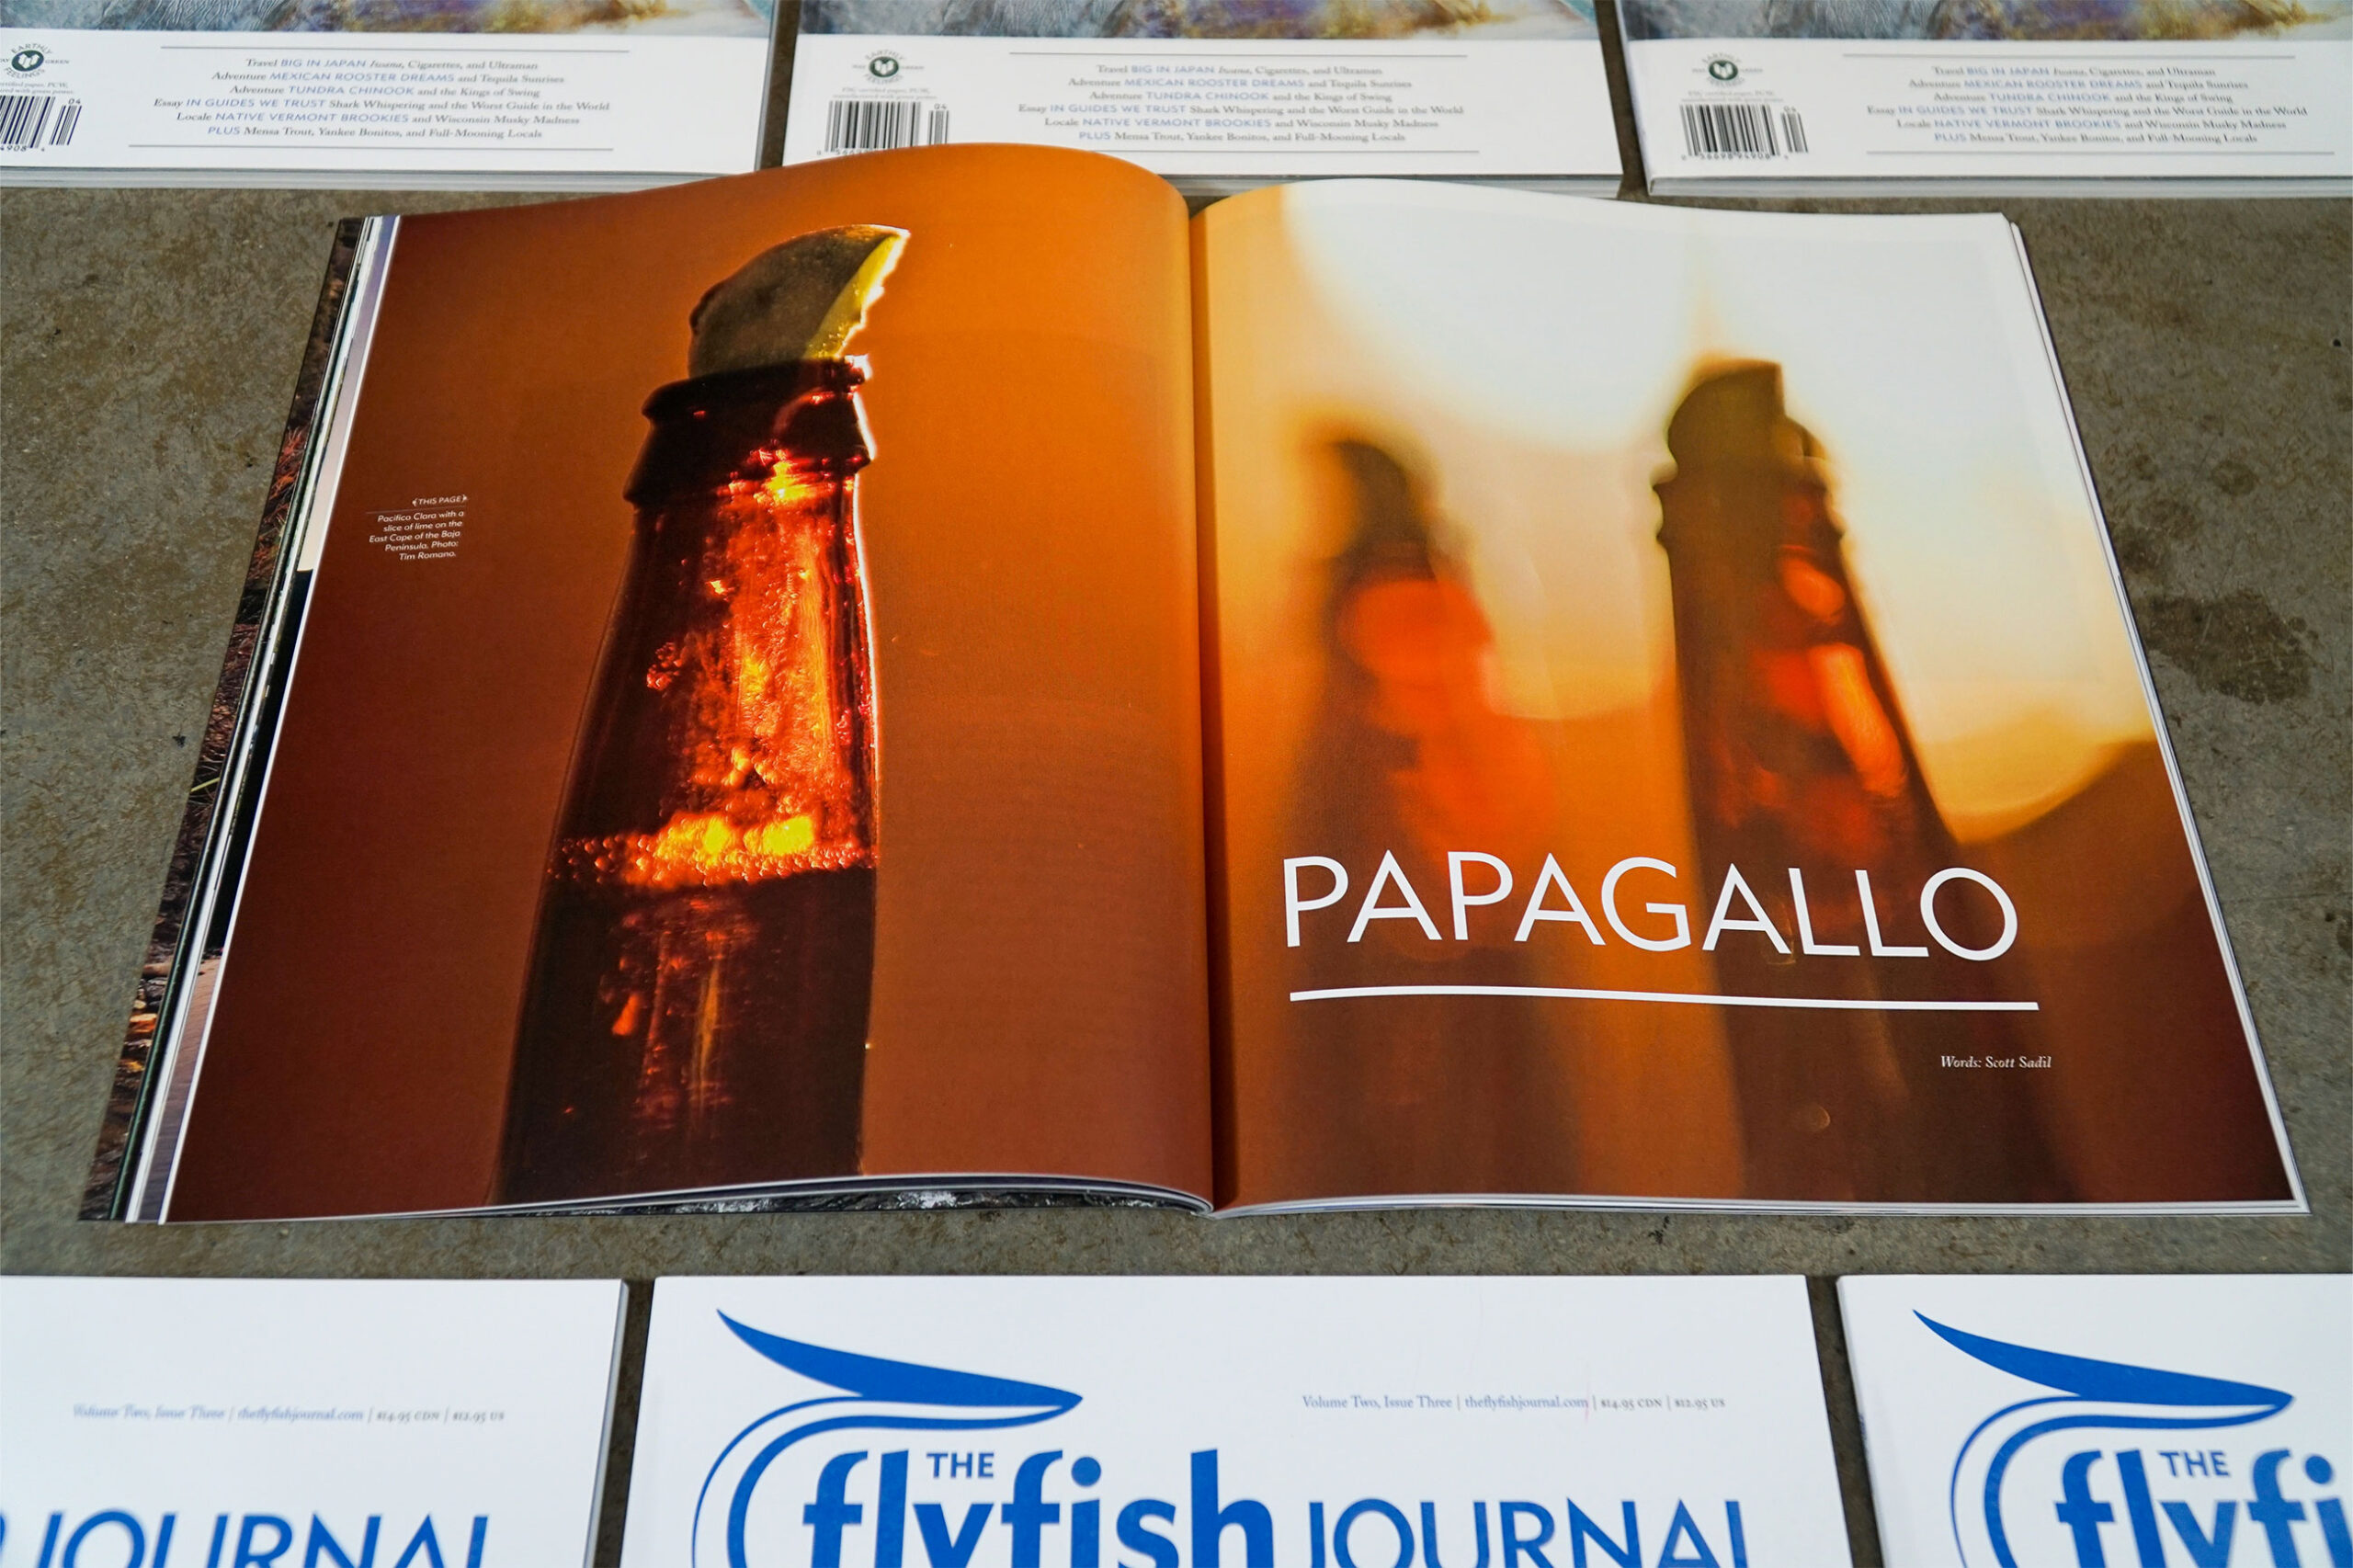 The Flyfish Journal Volume 2 Issue 3 Feature Papagallo